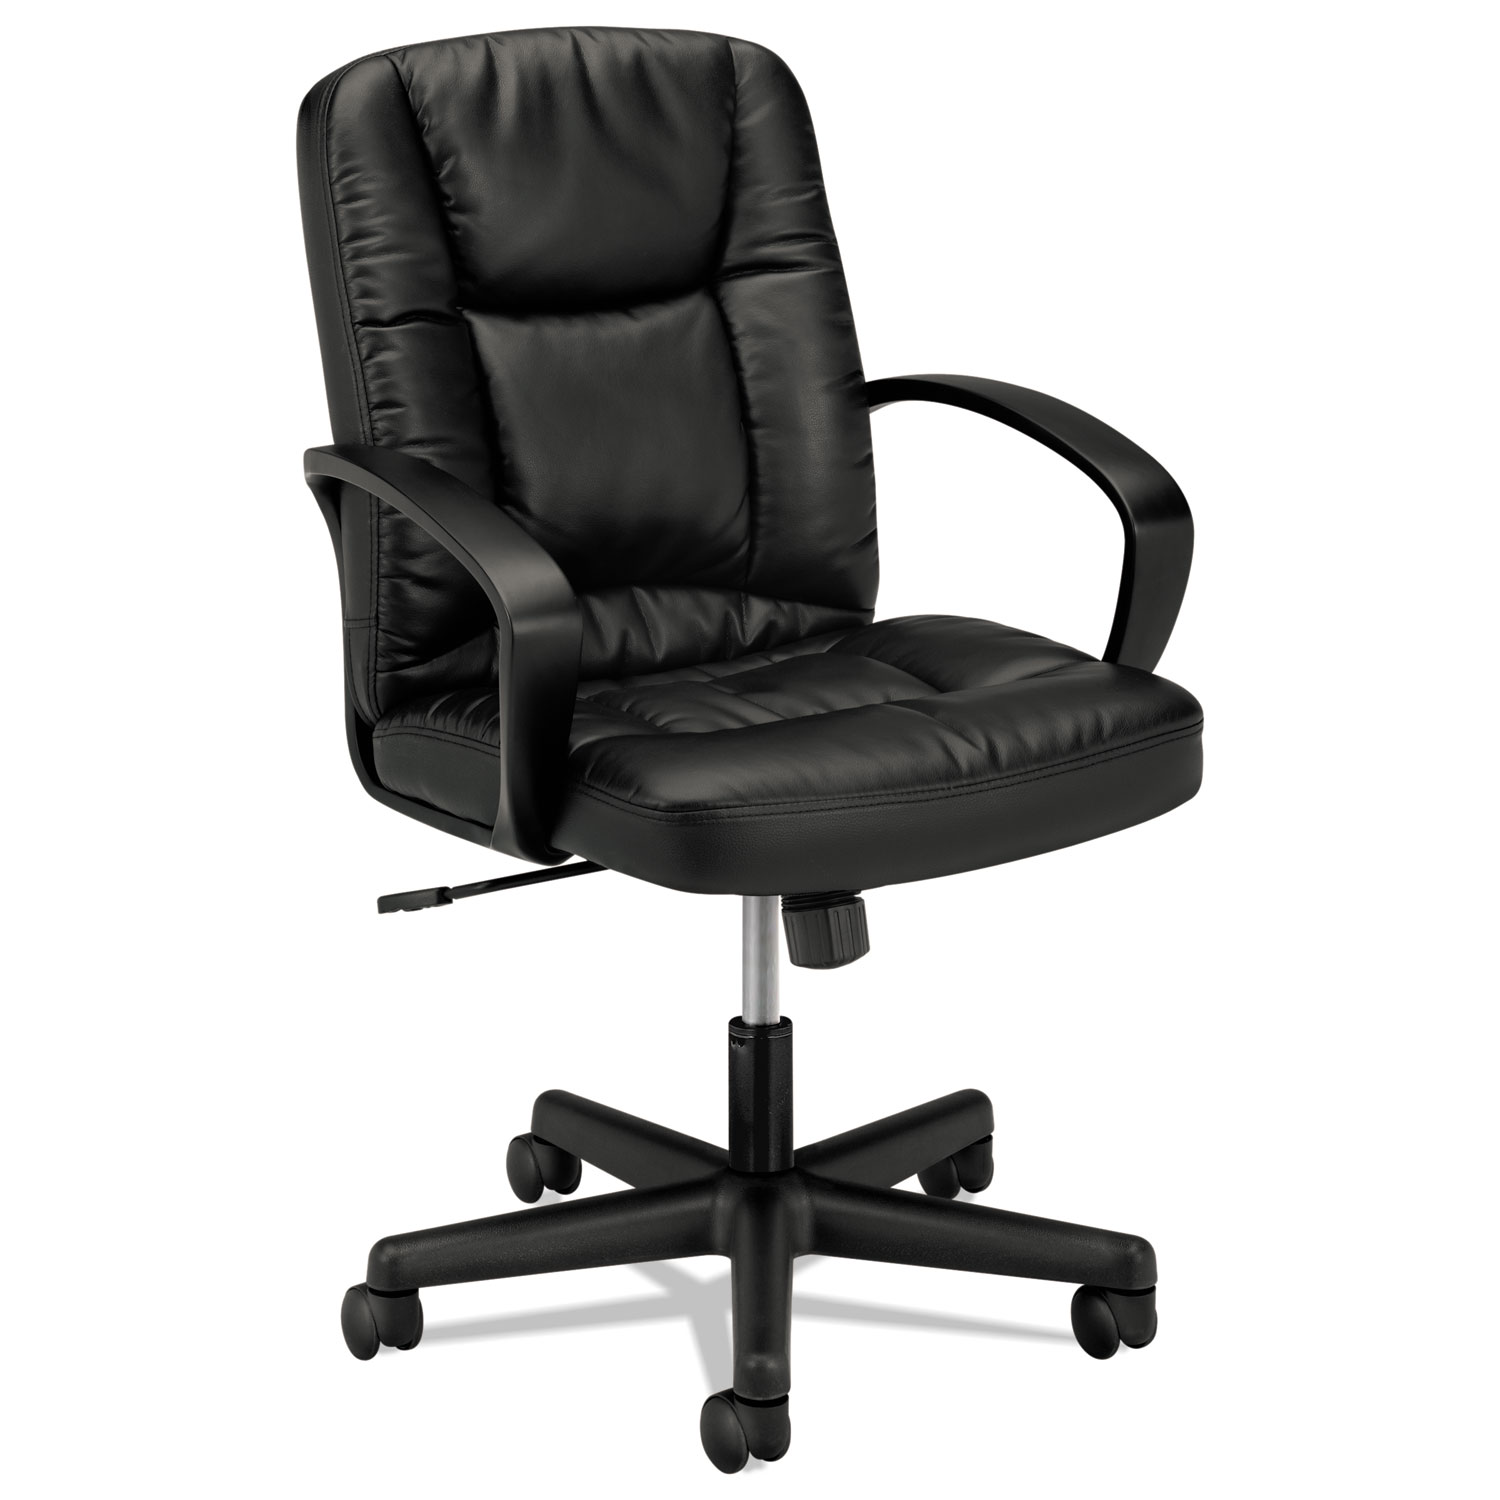 VL171 Series Executive Mid-Back Chair, Black Leather